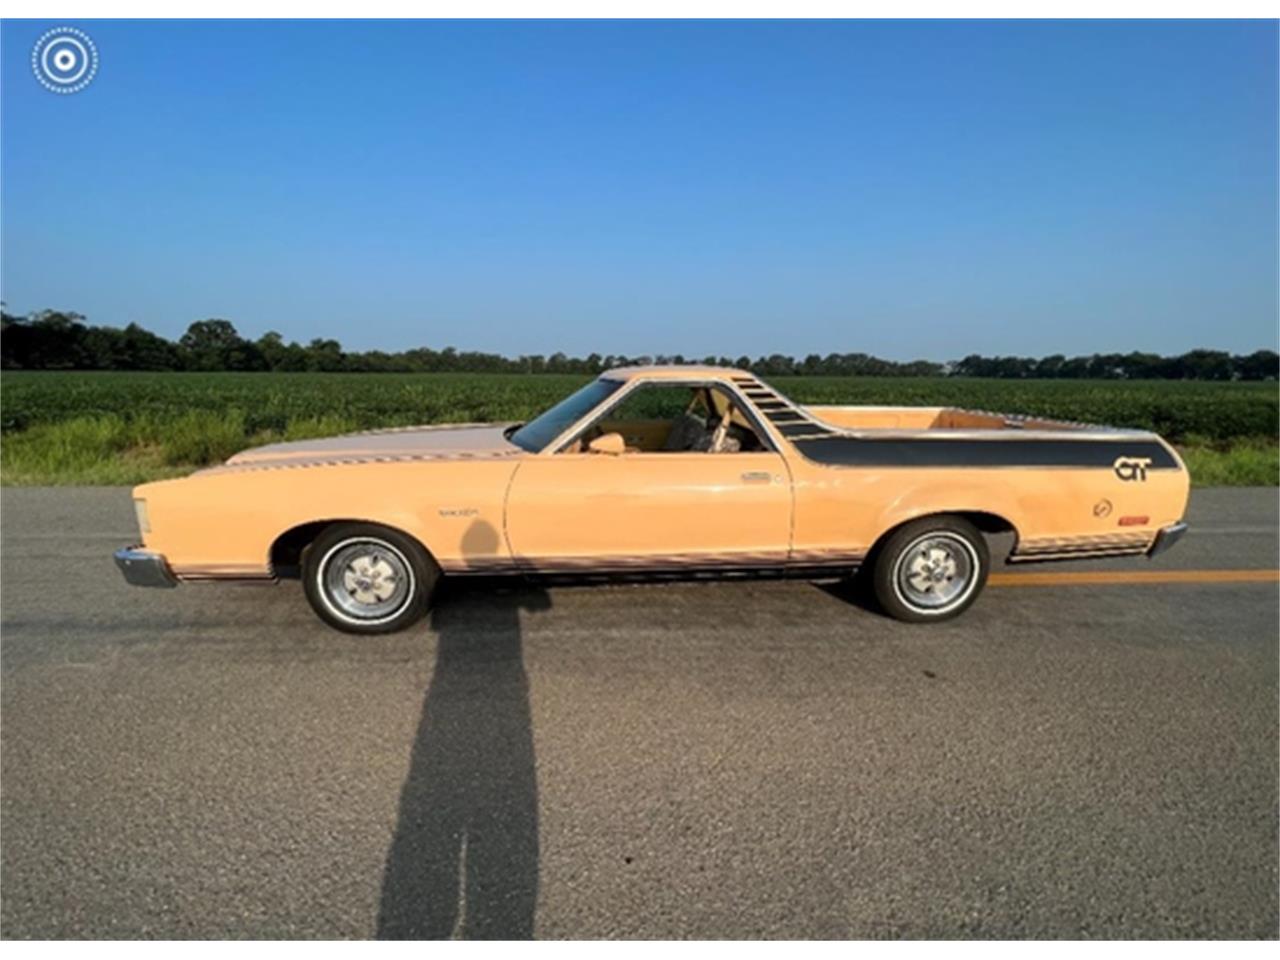 For Sale at Auction: 1979 Ford Ranchero in Shawnee, Oklahoma for sale in Shawnee, OK